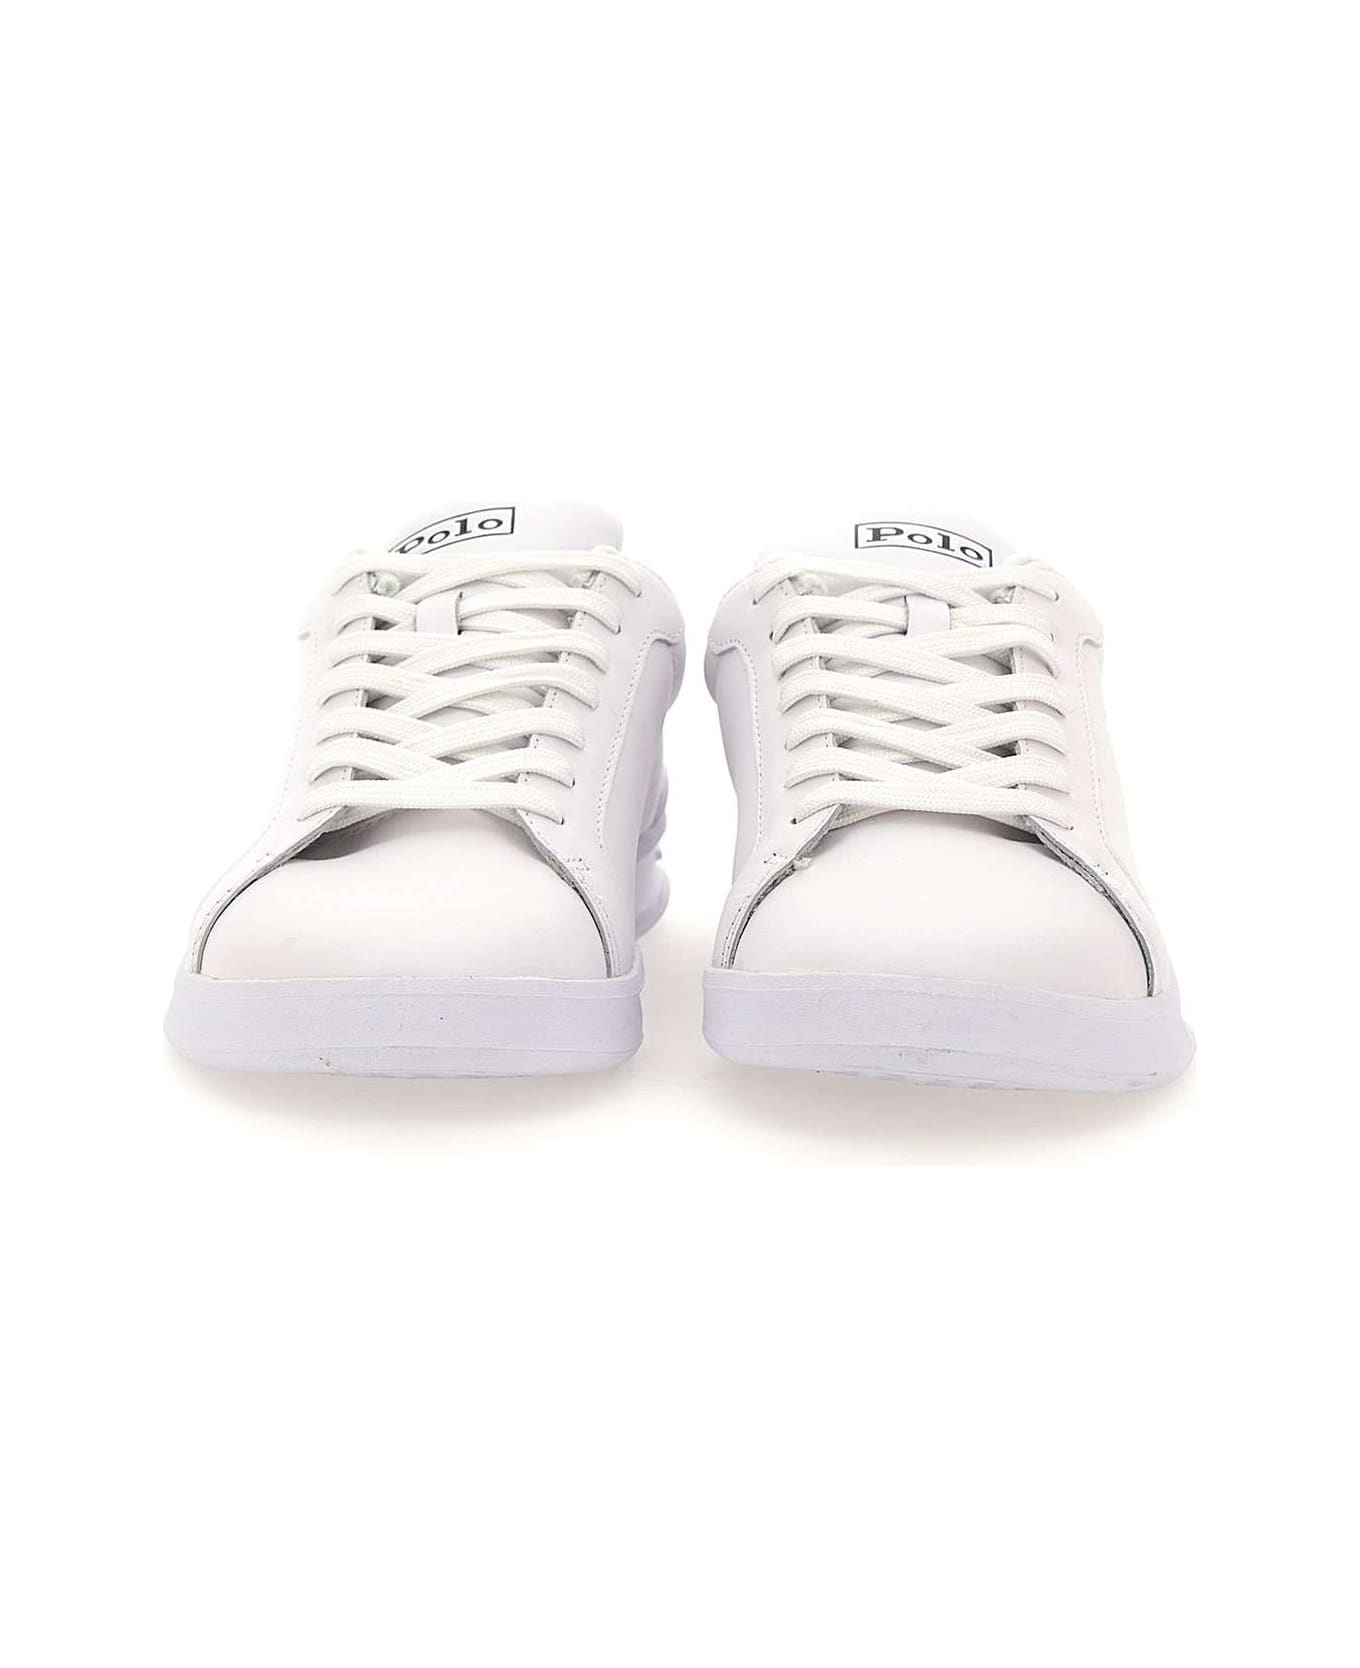 Polo Ralph Lauren 'heritage Court' Leather Sneakers - WHITE スニーカー